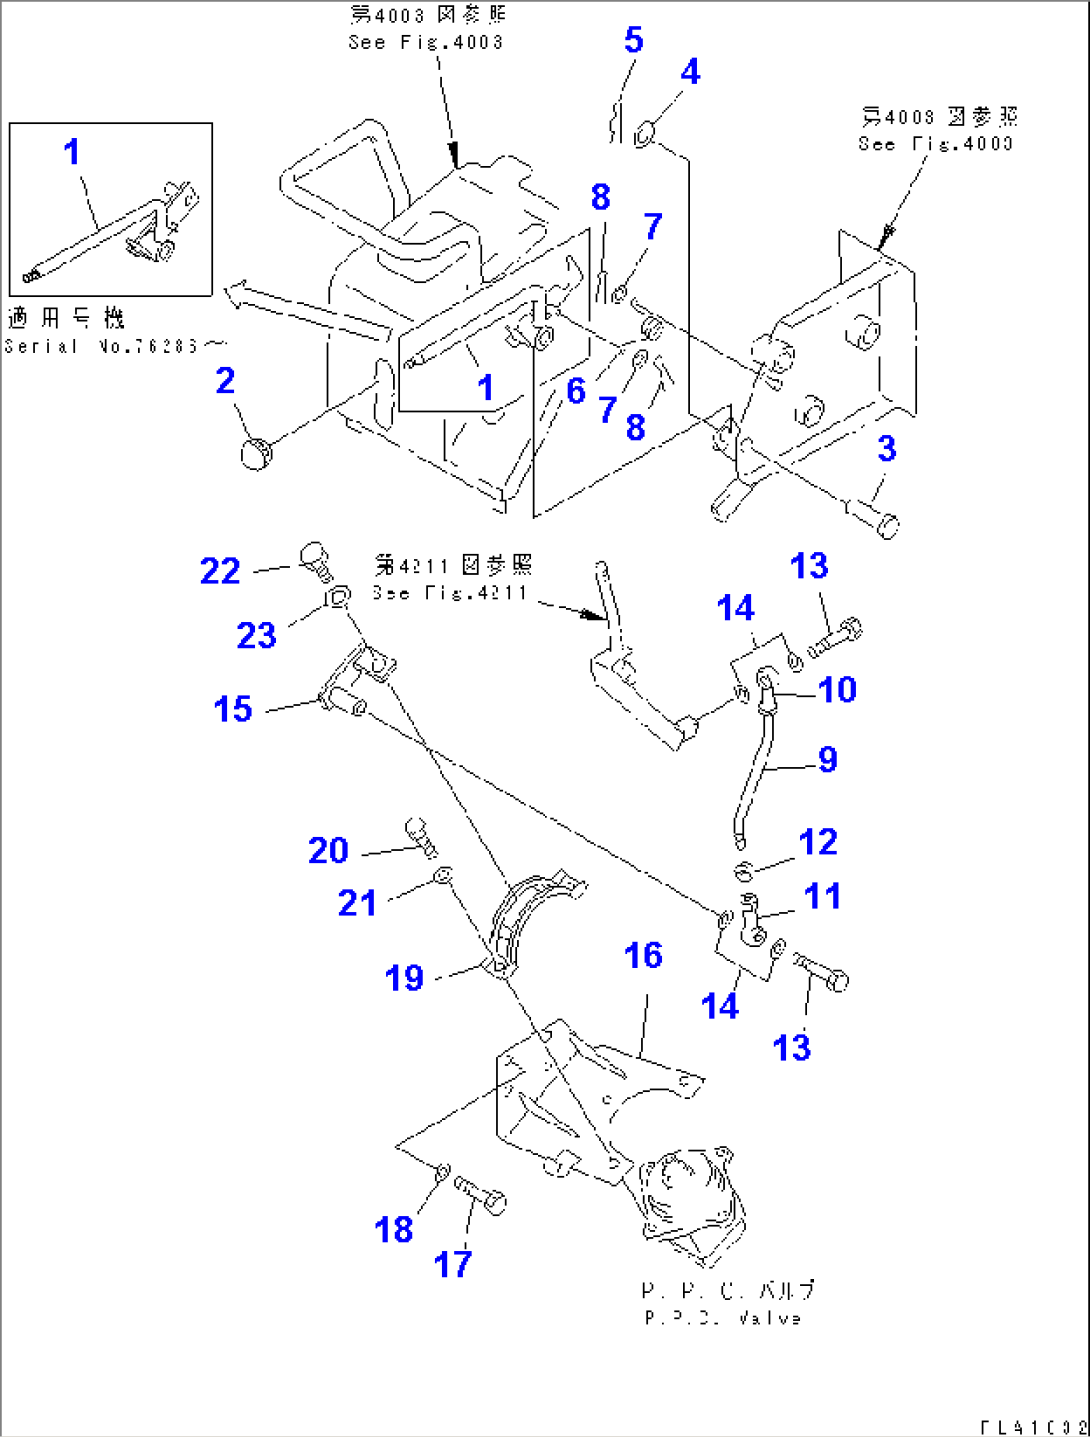 TRANSMISSION CONTROL LEVER (3/3) (FOR MONO LEVER STEERING)